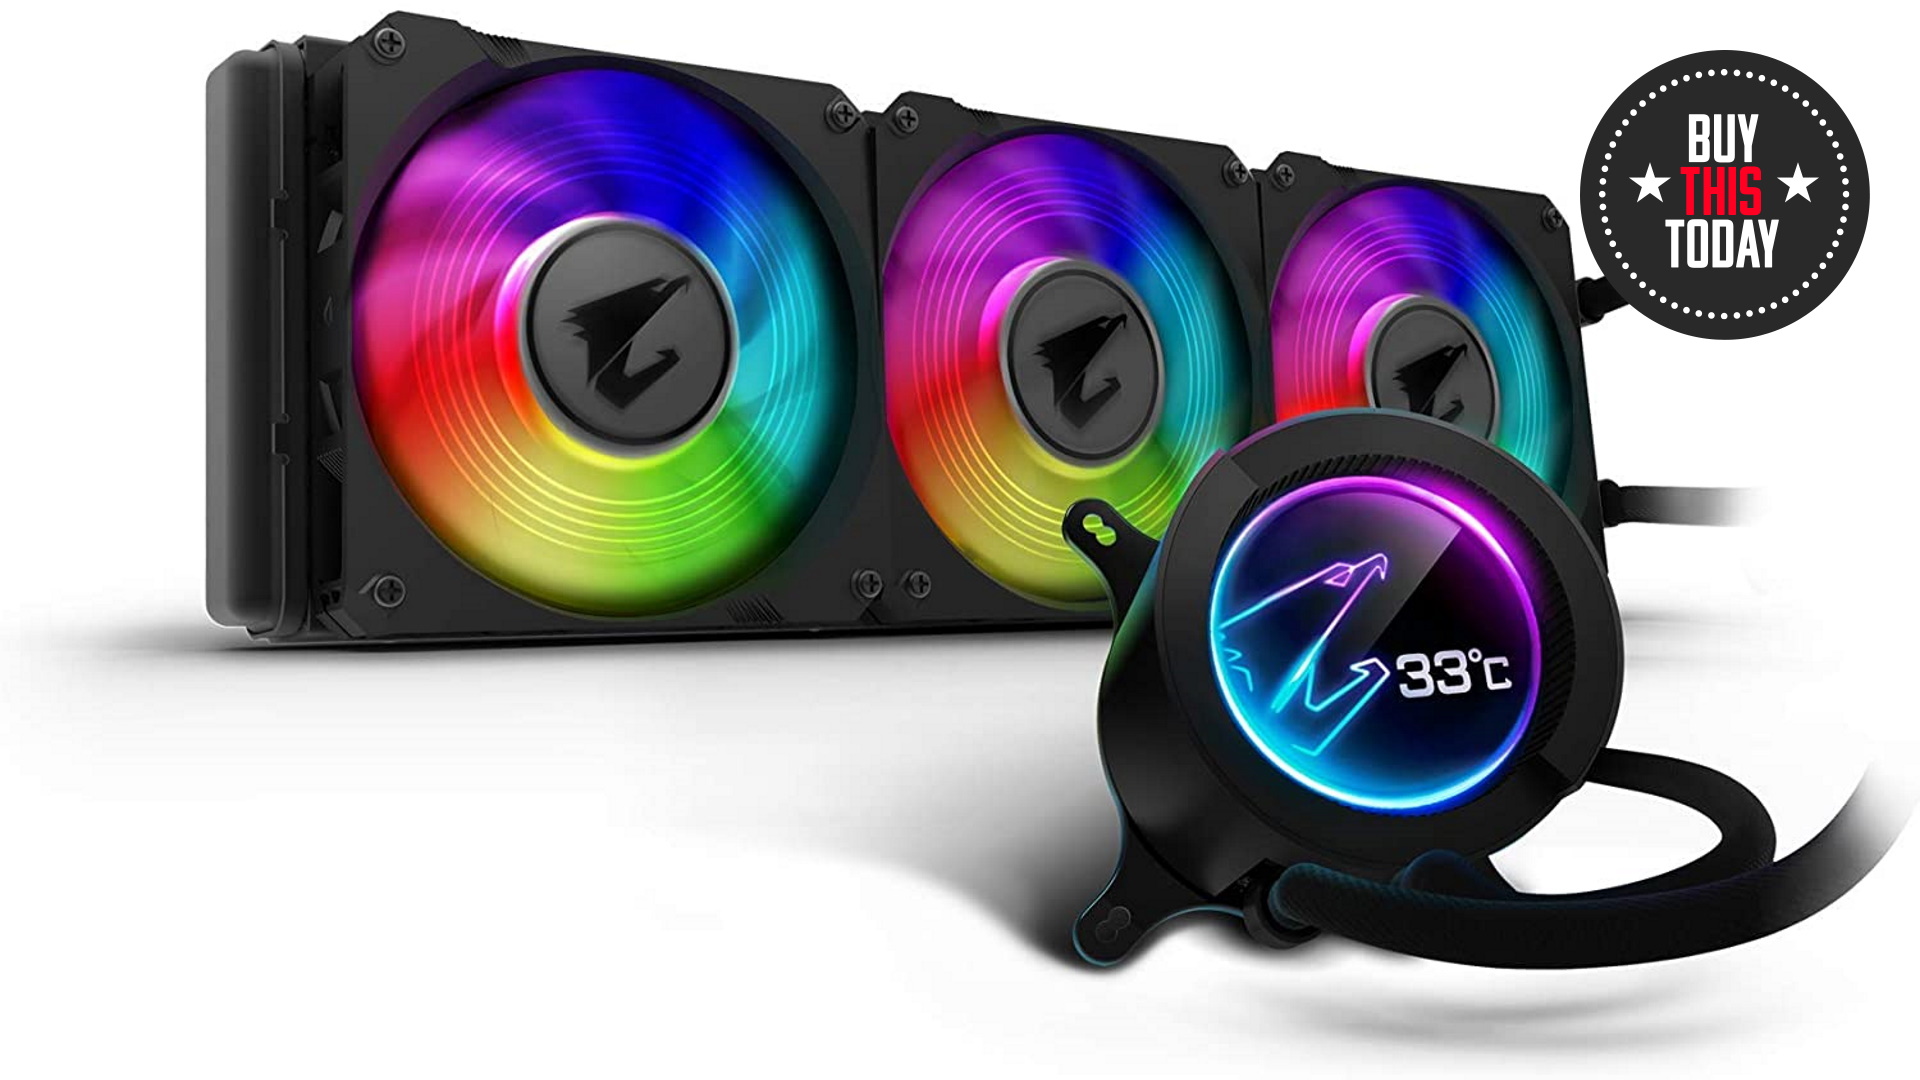 Buy this today an AIO liquid cooler with fully customisable LCD display